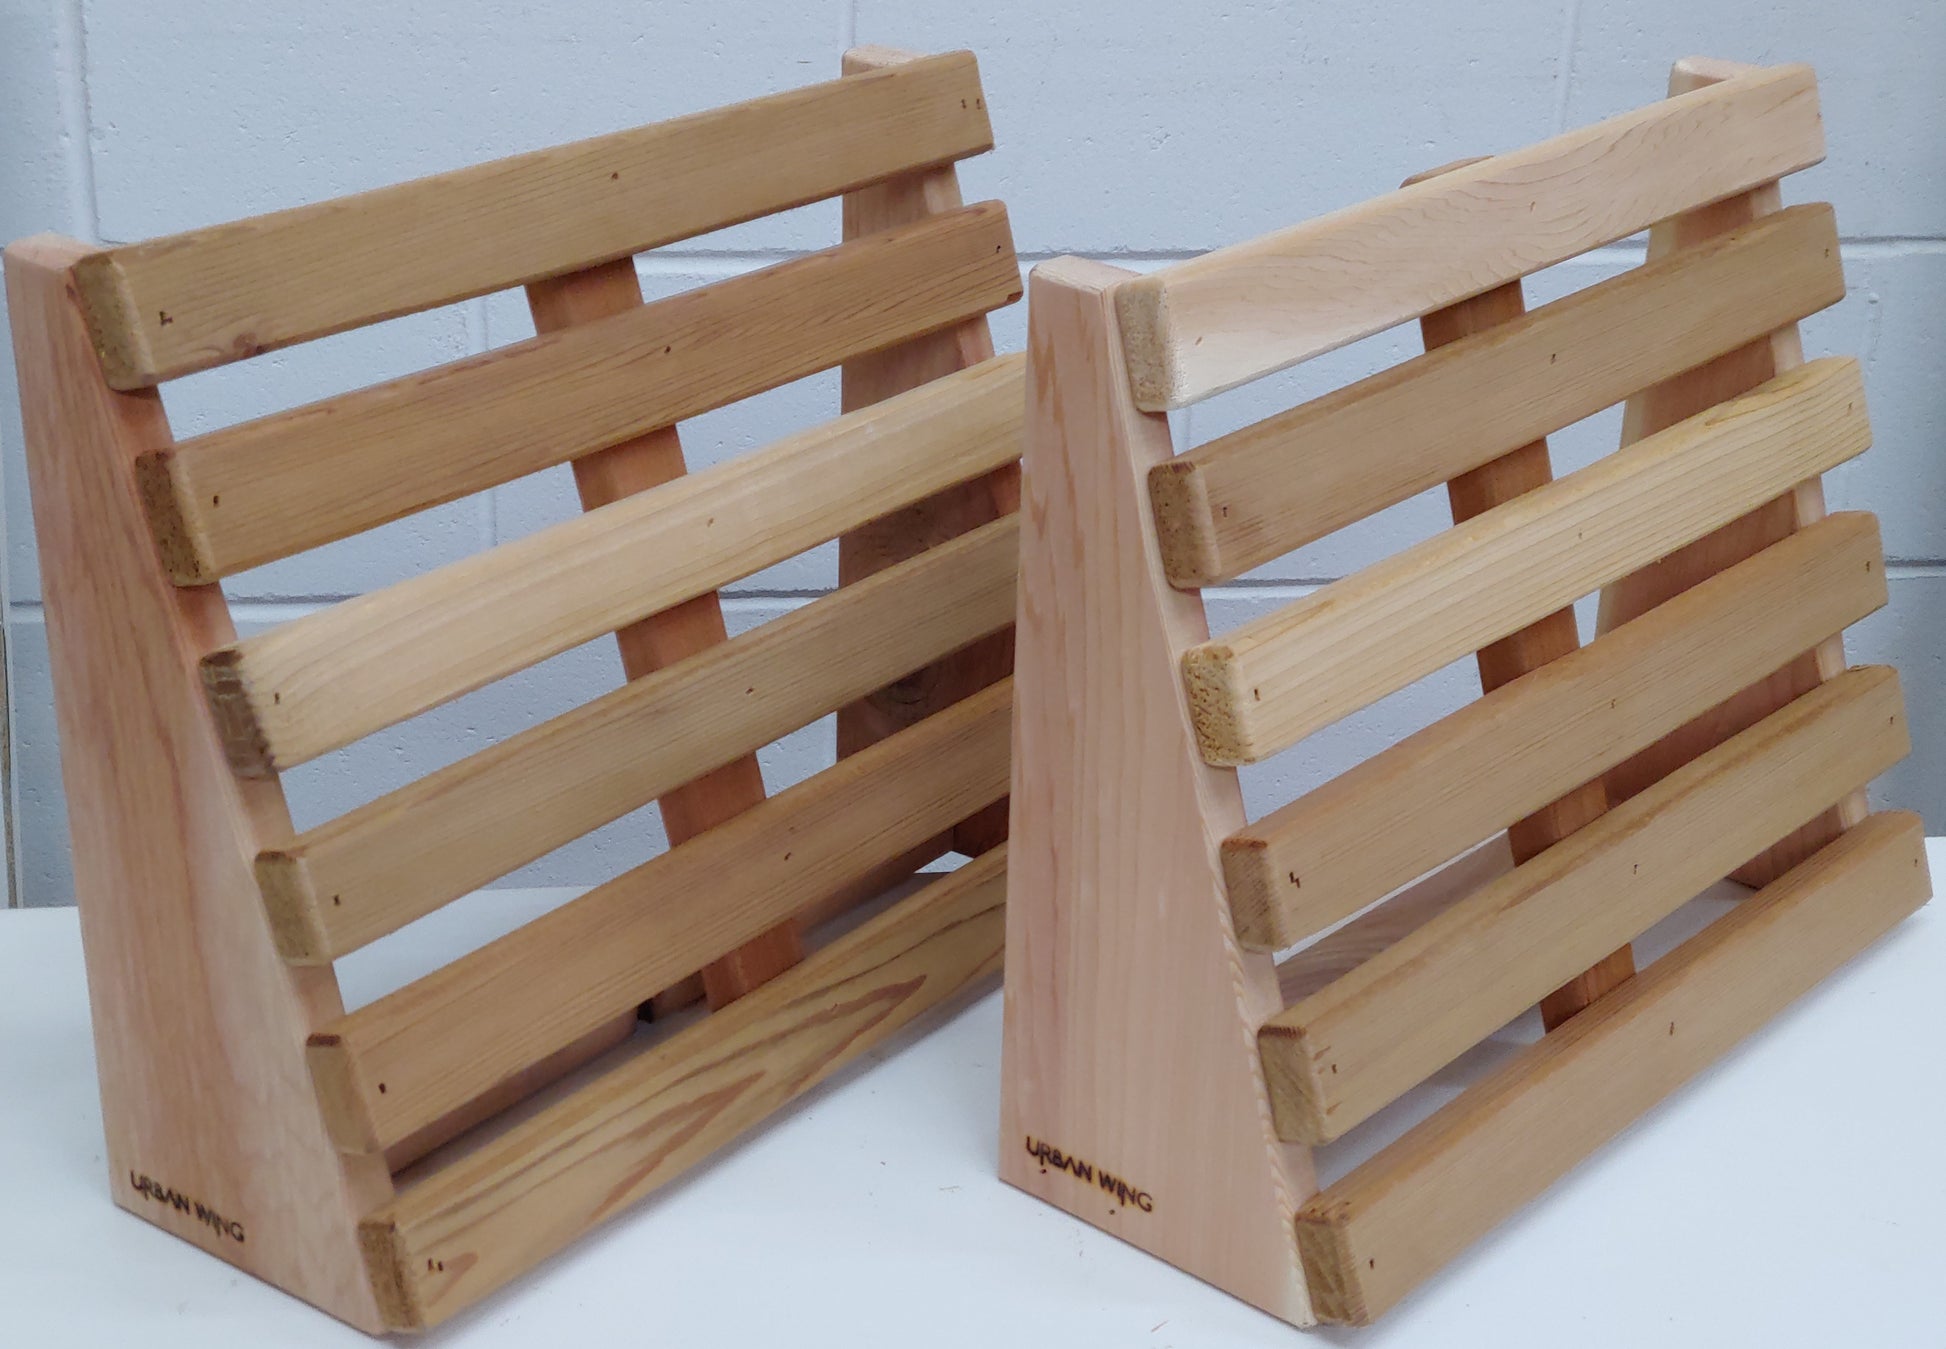 A sauna backrest that you can cut and nail together in less than an hour